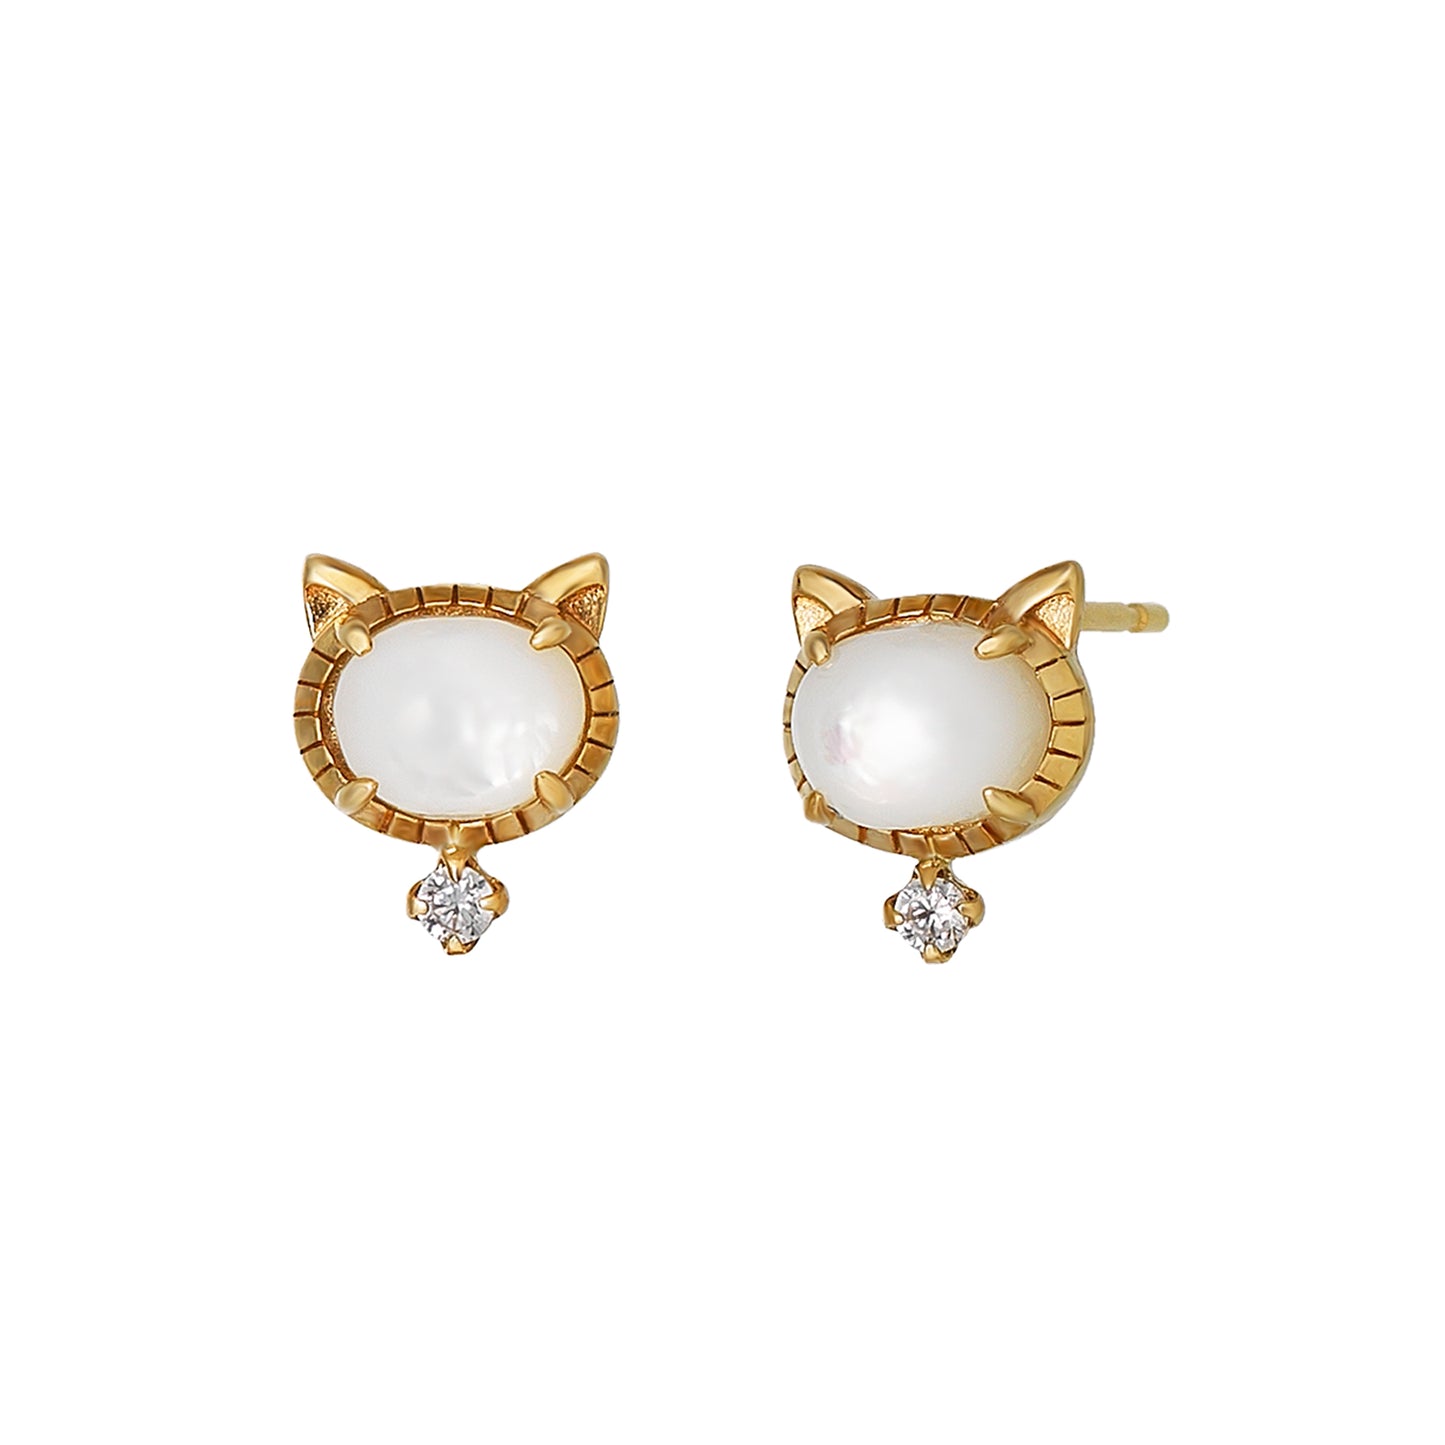 18K/10K Yellow Gold White Shell Cat Stud Earrings - Product Image